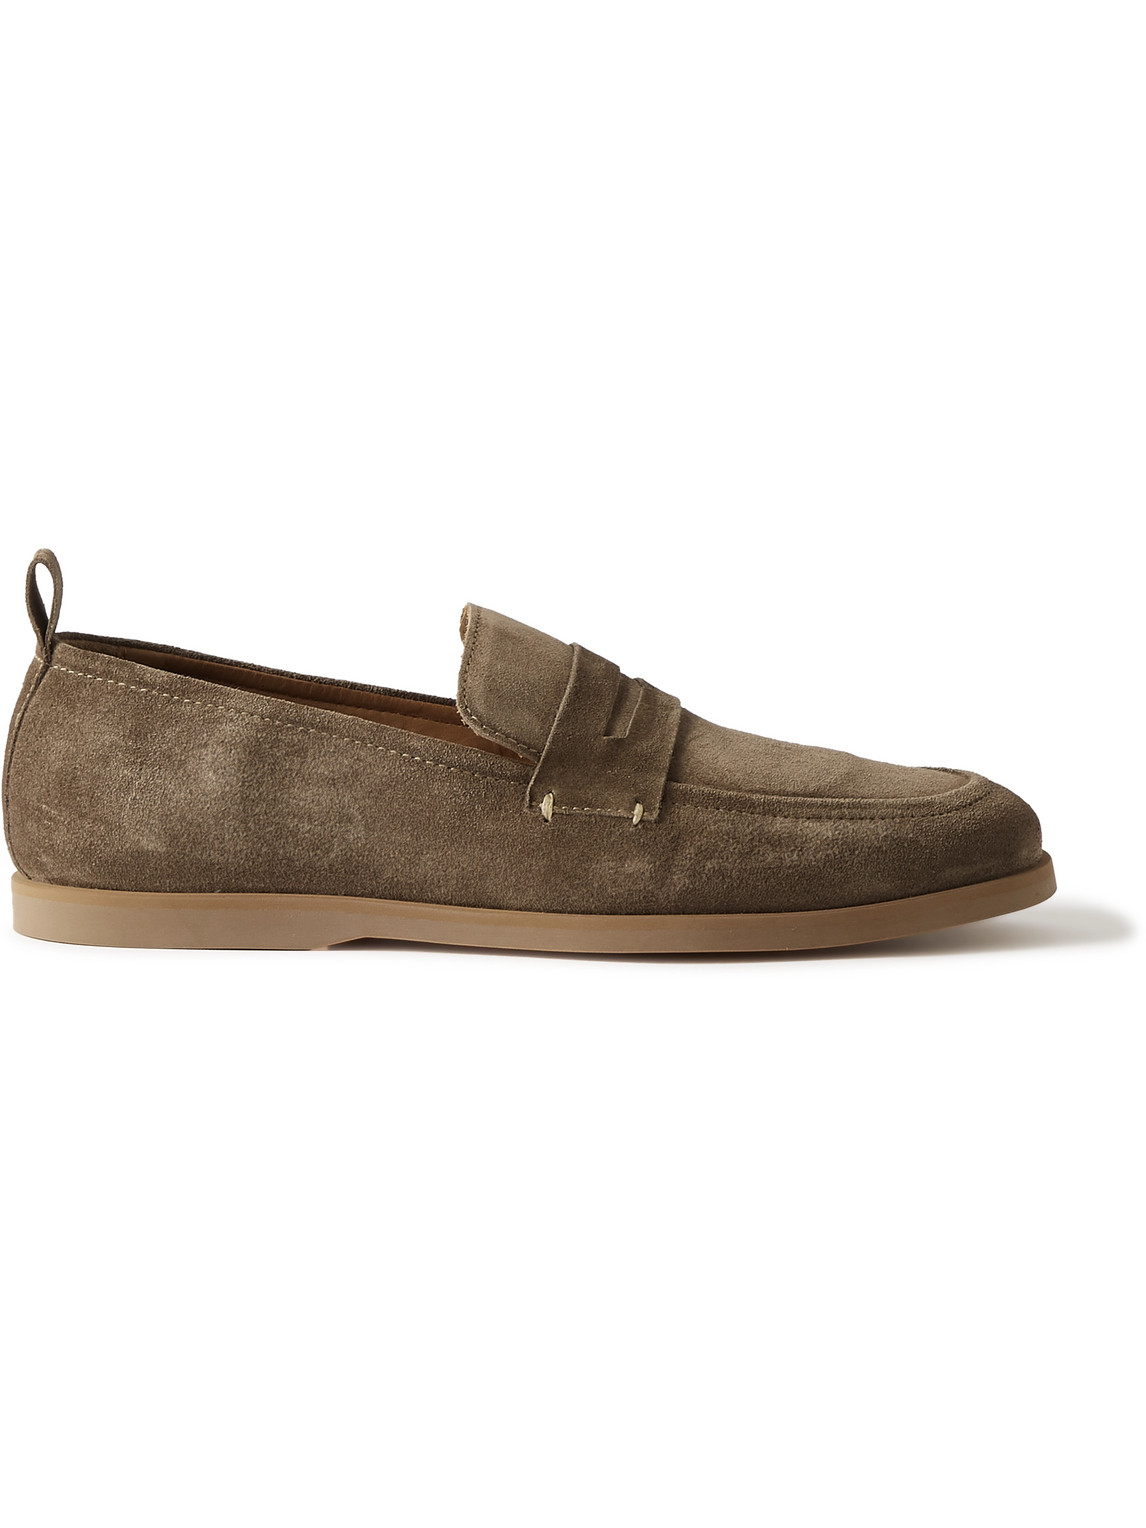 Leo Suede Penny Loafers